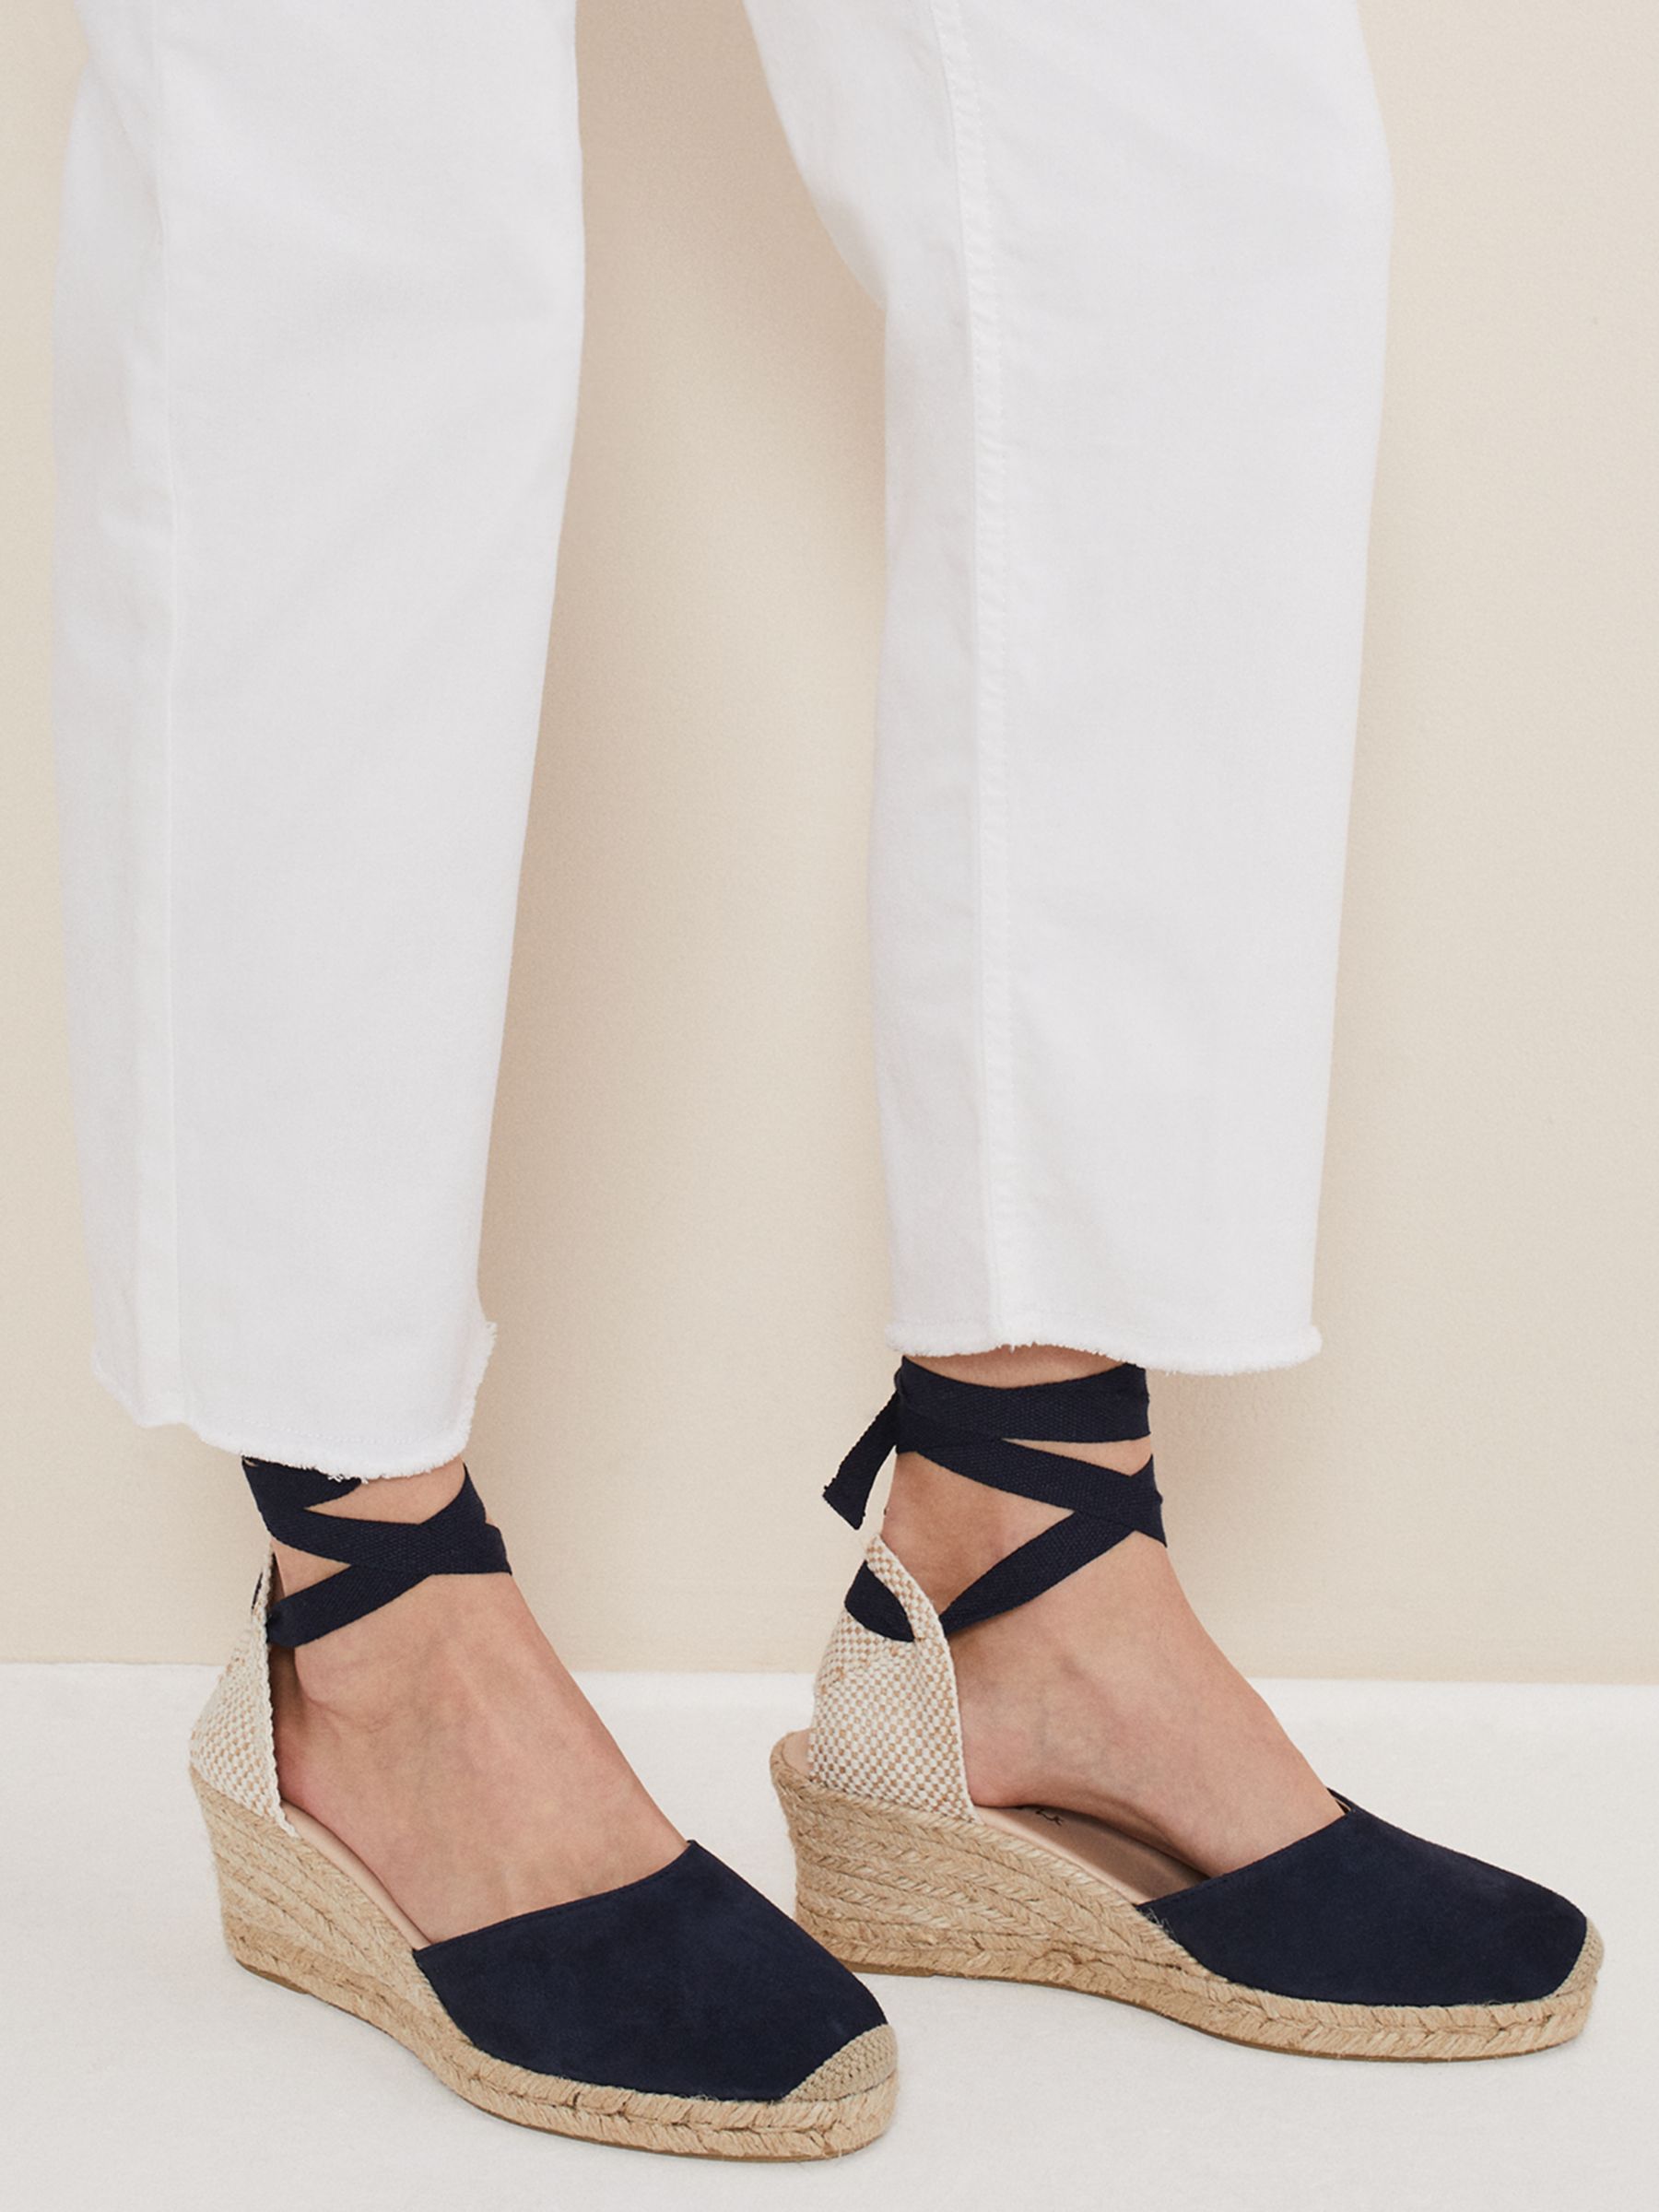 Phase Eight Suede Ankle Tie Espadrilles, Navy at John Lewis & Partners